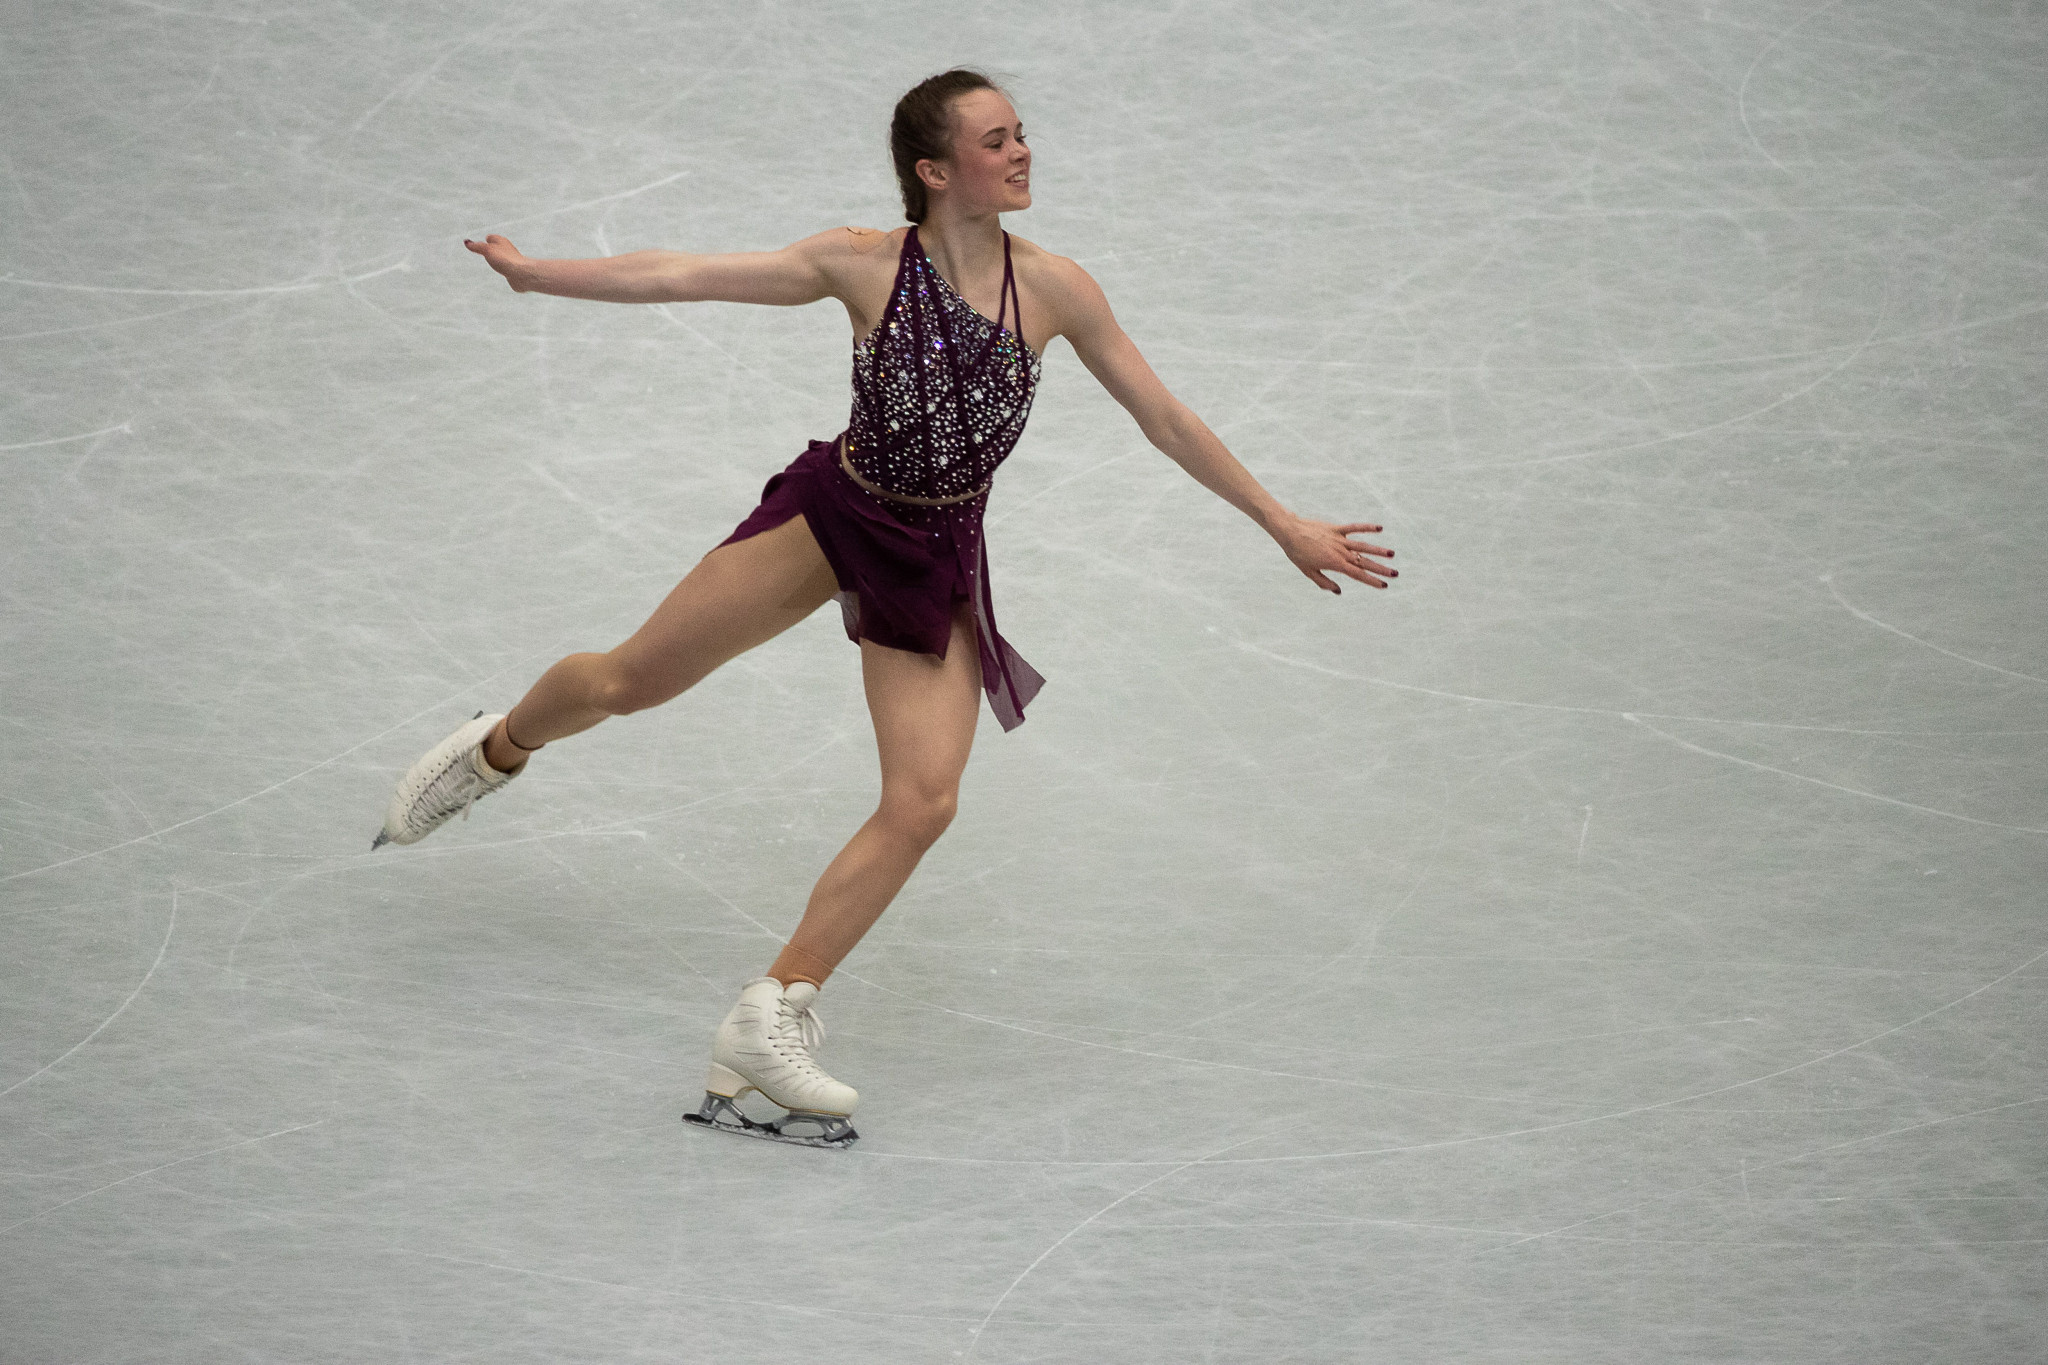 The ISU said there was currently no evidence against Mariah Bell ©Getty Images